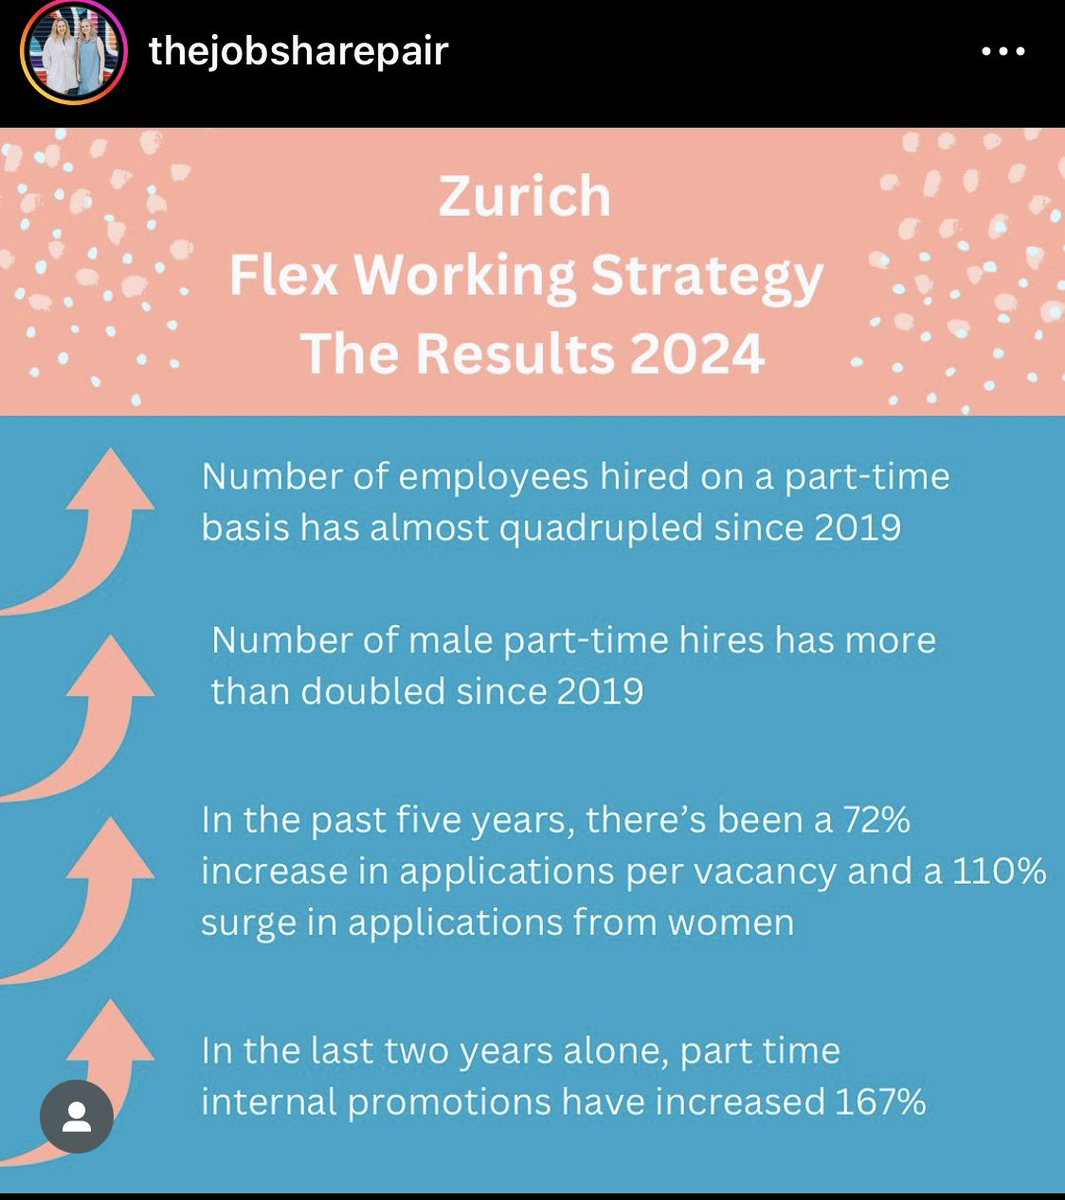 Thanks @JobSharePair for this info on @ZurichInsUK and their incredible work on gender diversity. These results have been achieved by marketing all roles as being open to flexible working. 🙌